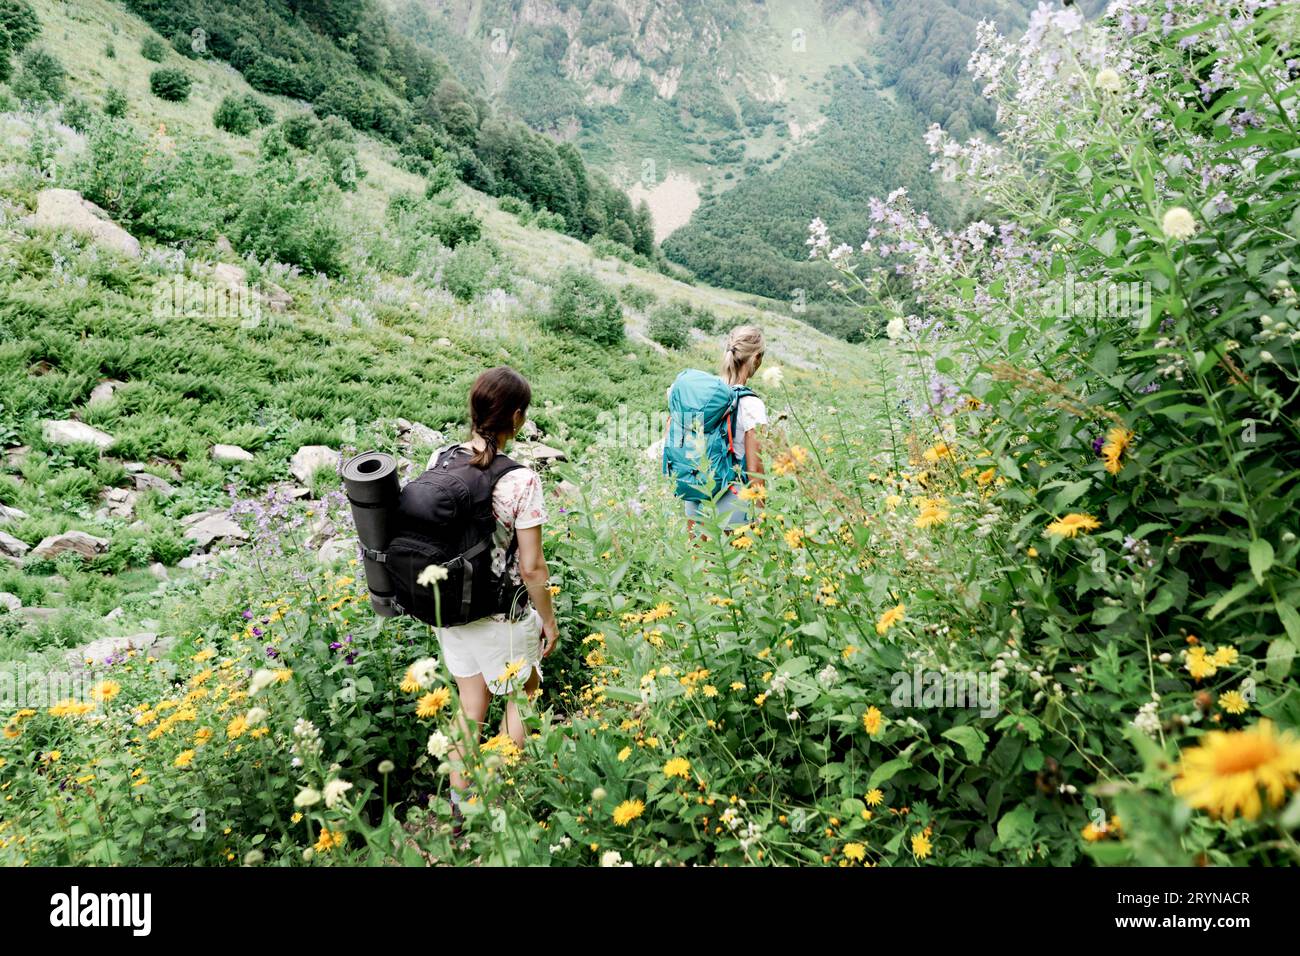 A back view of hikers with backpacks going on a mountain expedition along the trail through the tall grass. Stock Photo